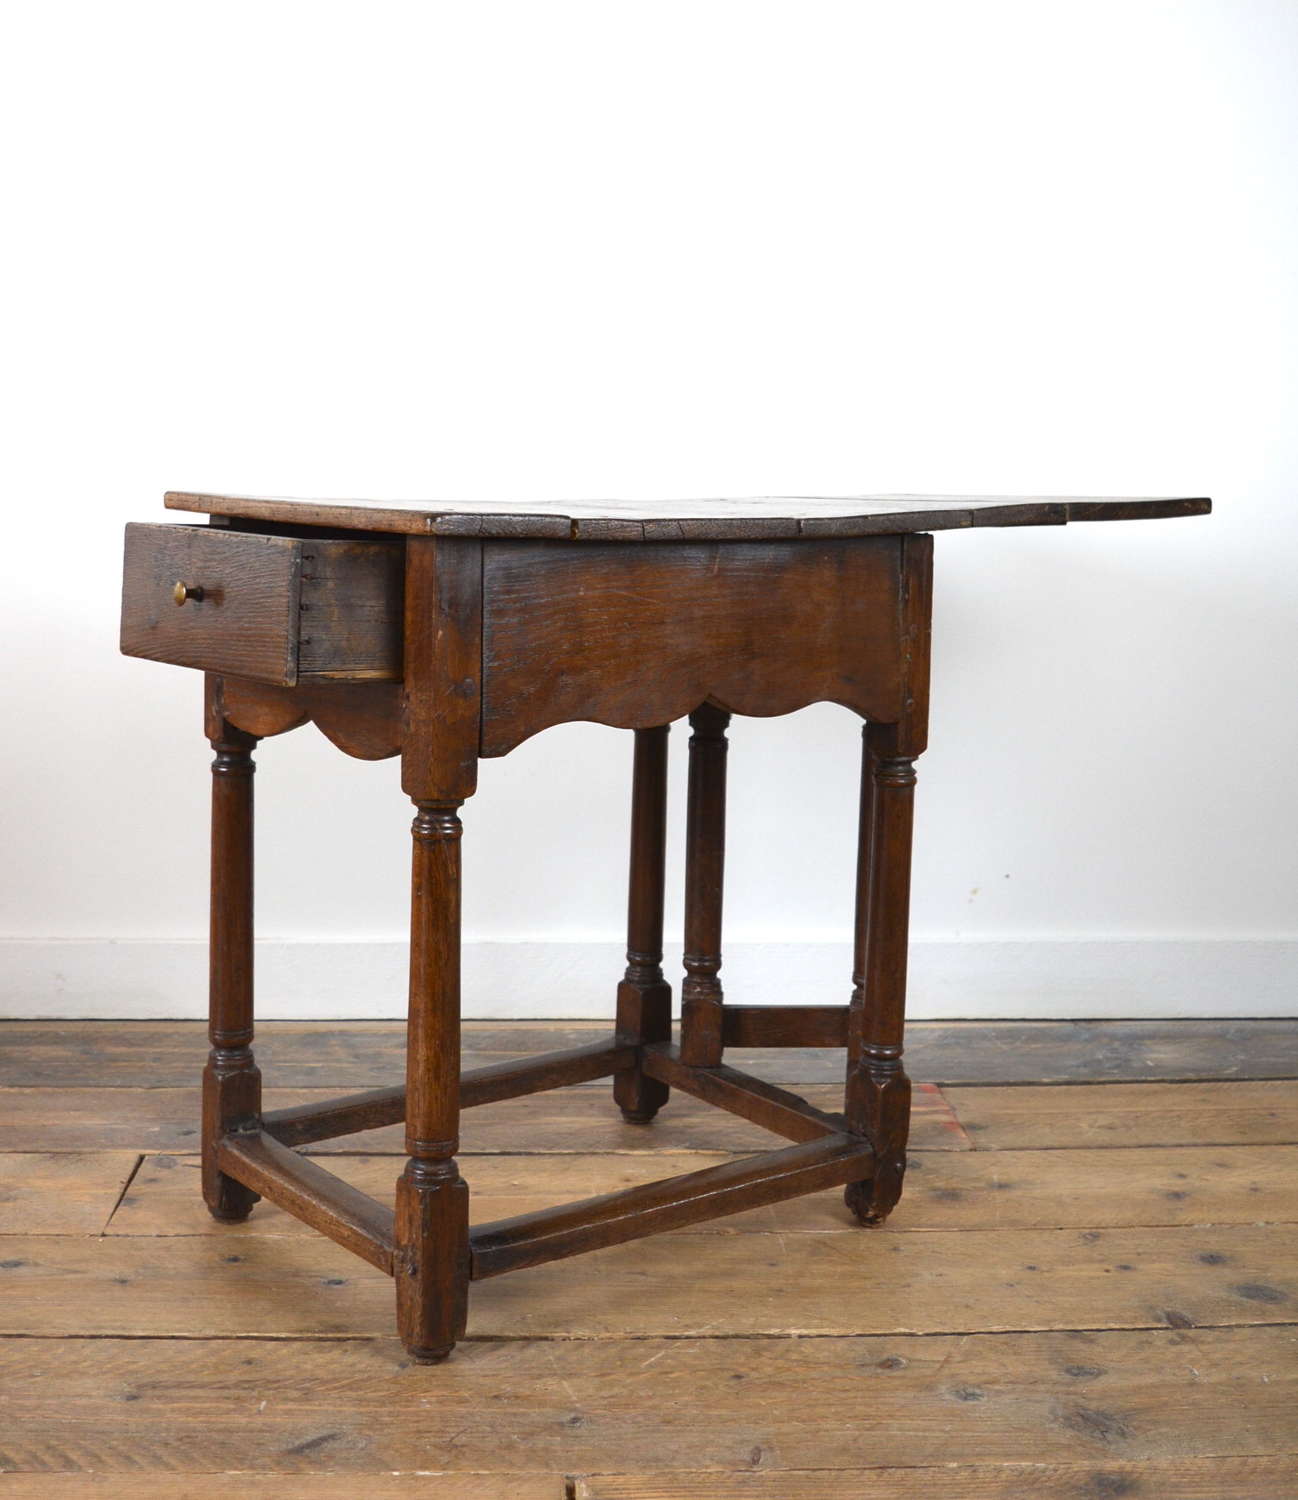 EARLY 19TH CENTURY SINGLE DROP LEAF TABLE